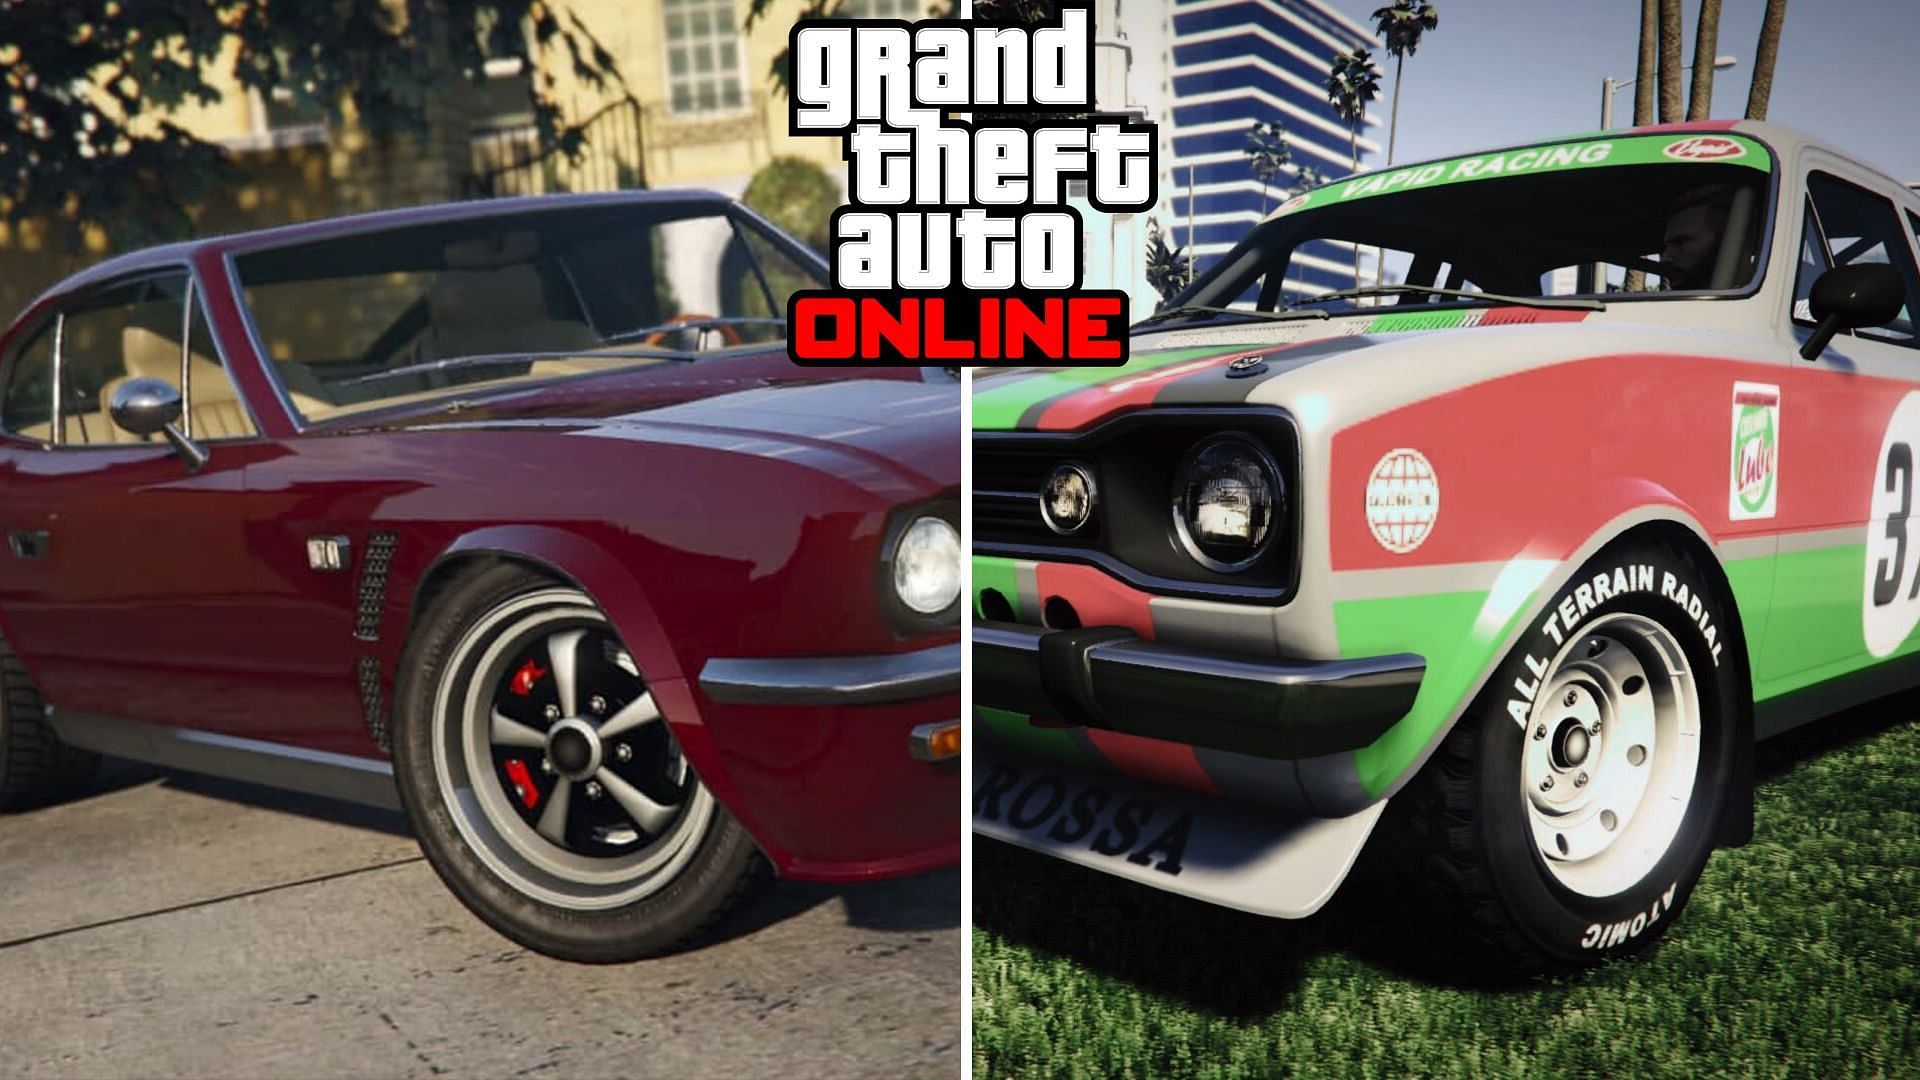 GTA News 🔴 RockstarINTEL.com on X: The GTA Online test track vehicles you  can drive this week are the Vapid Chino, the Grotti Turismo Classic and the  Bravado Gauntlet Hellfire. Full Event